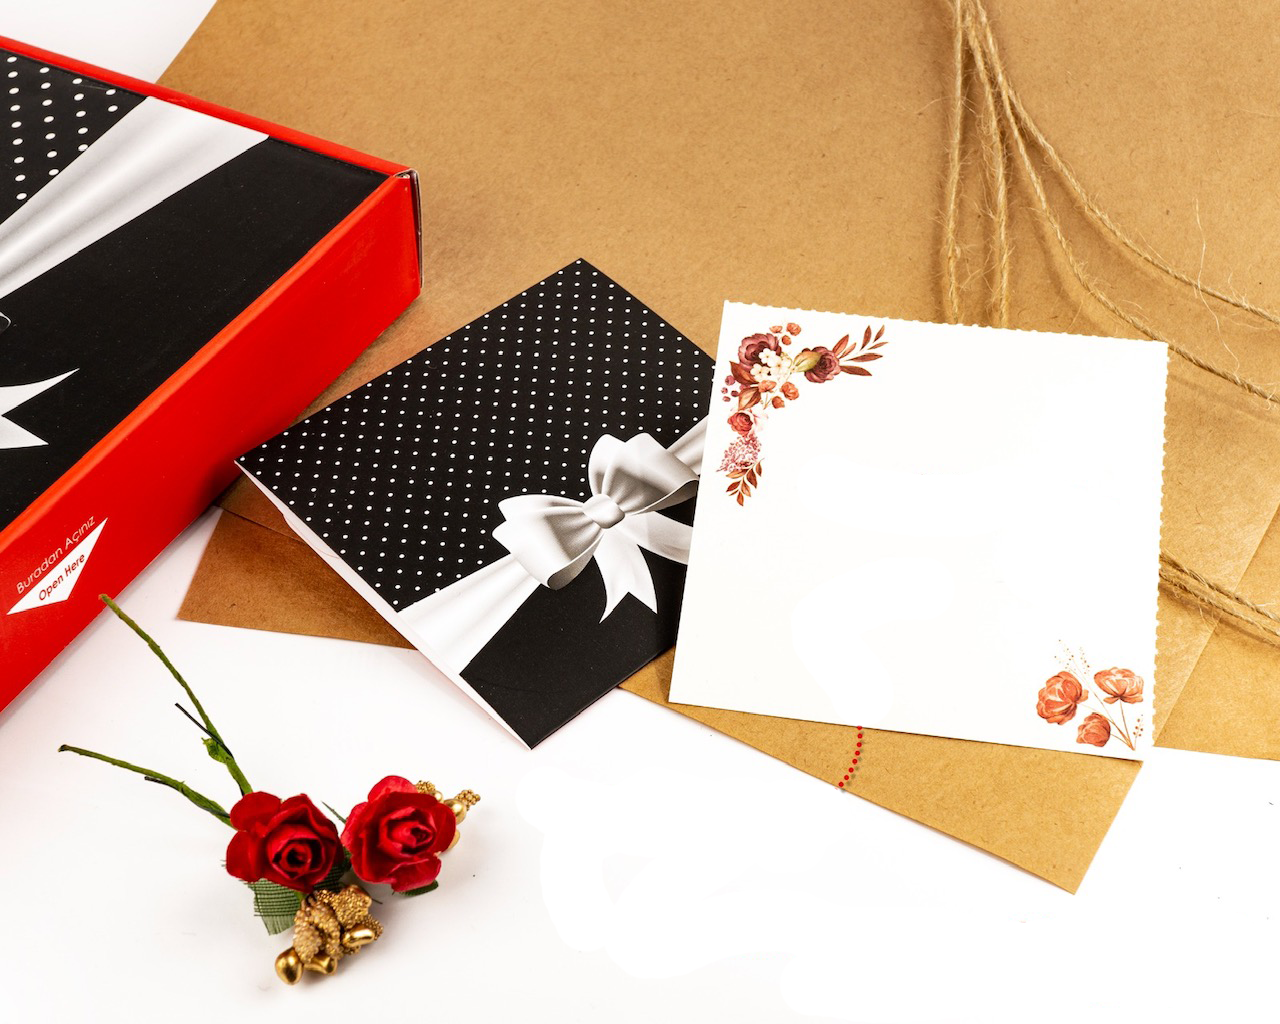 Gift wrapped with a blank card for personal messages